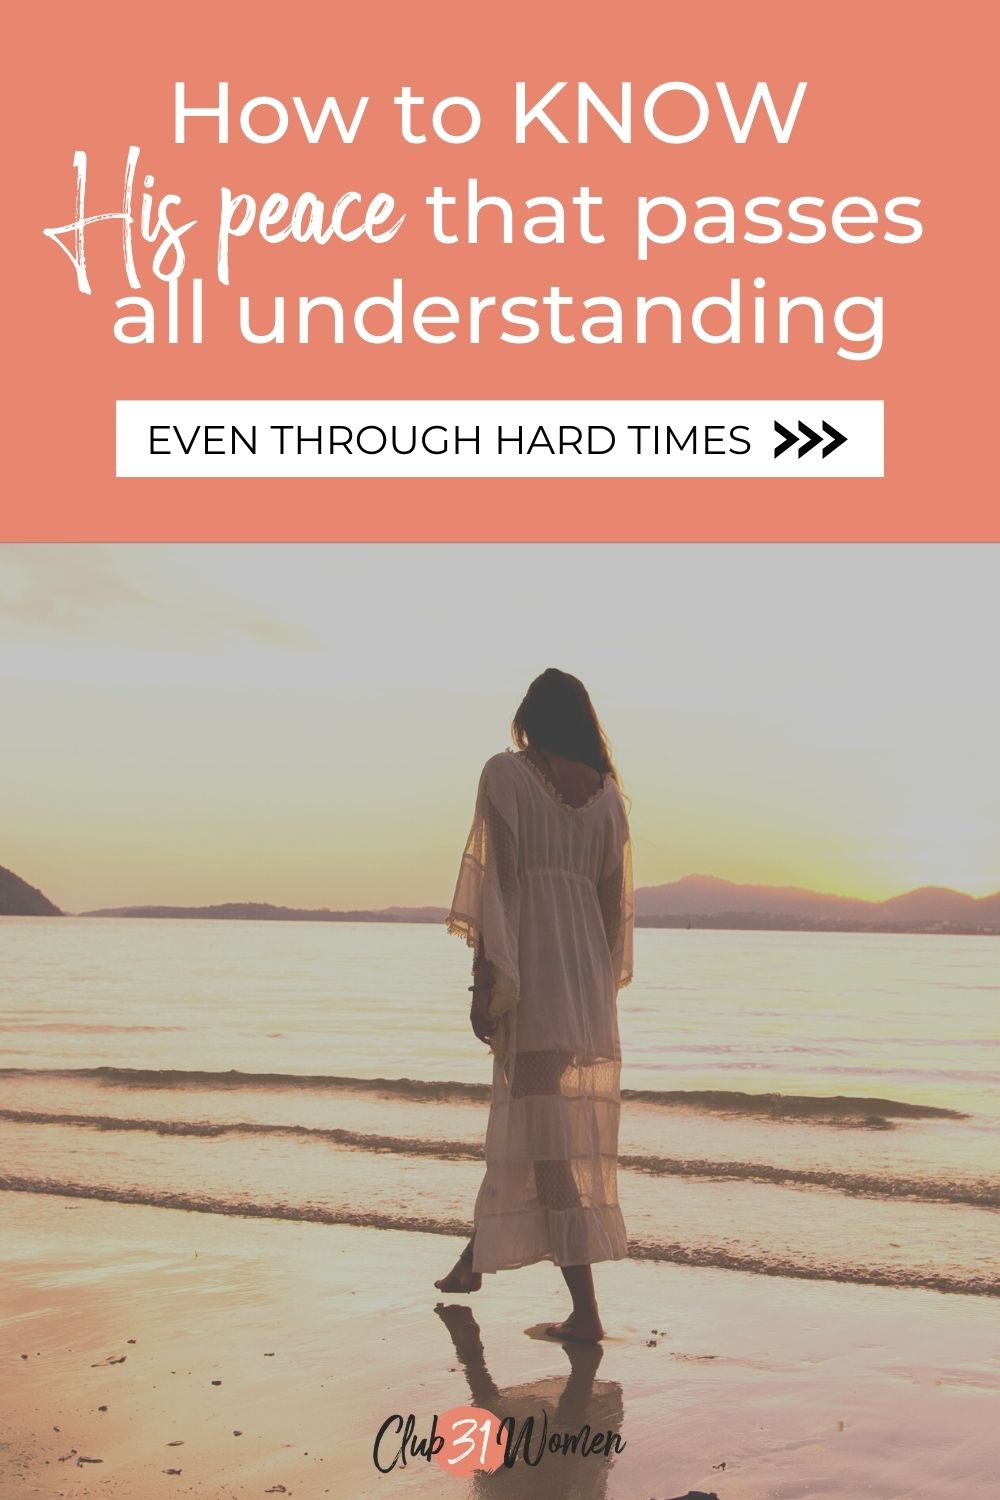 Peace is hard to find in the chaotic world we are living in. But we will not find it in this world. True peace is found as we put our trust in Jesus. via @Club31Women